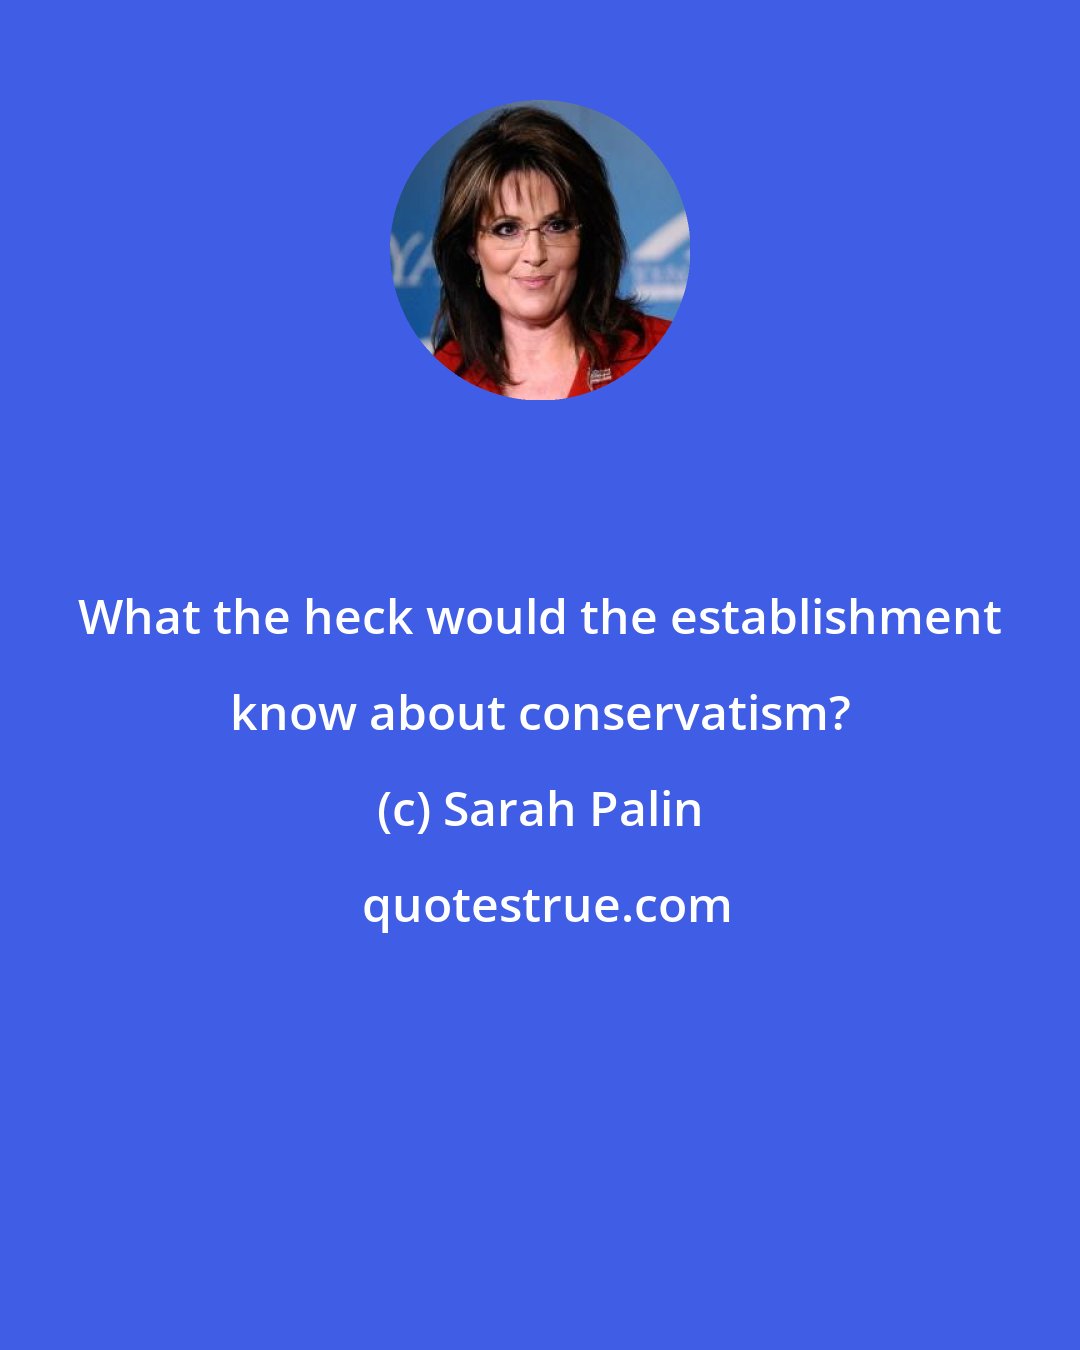 Sarah Palin: What the heck would the establishment know about conservatism?